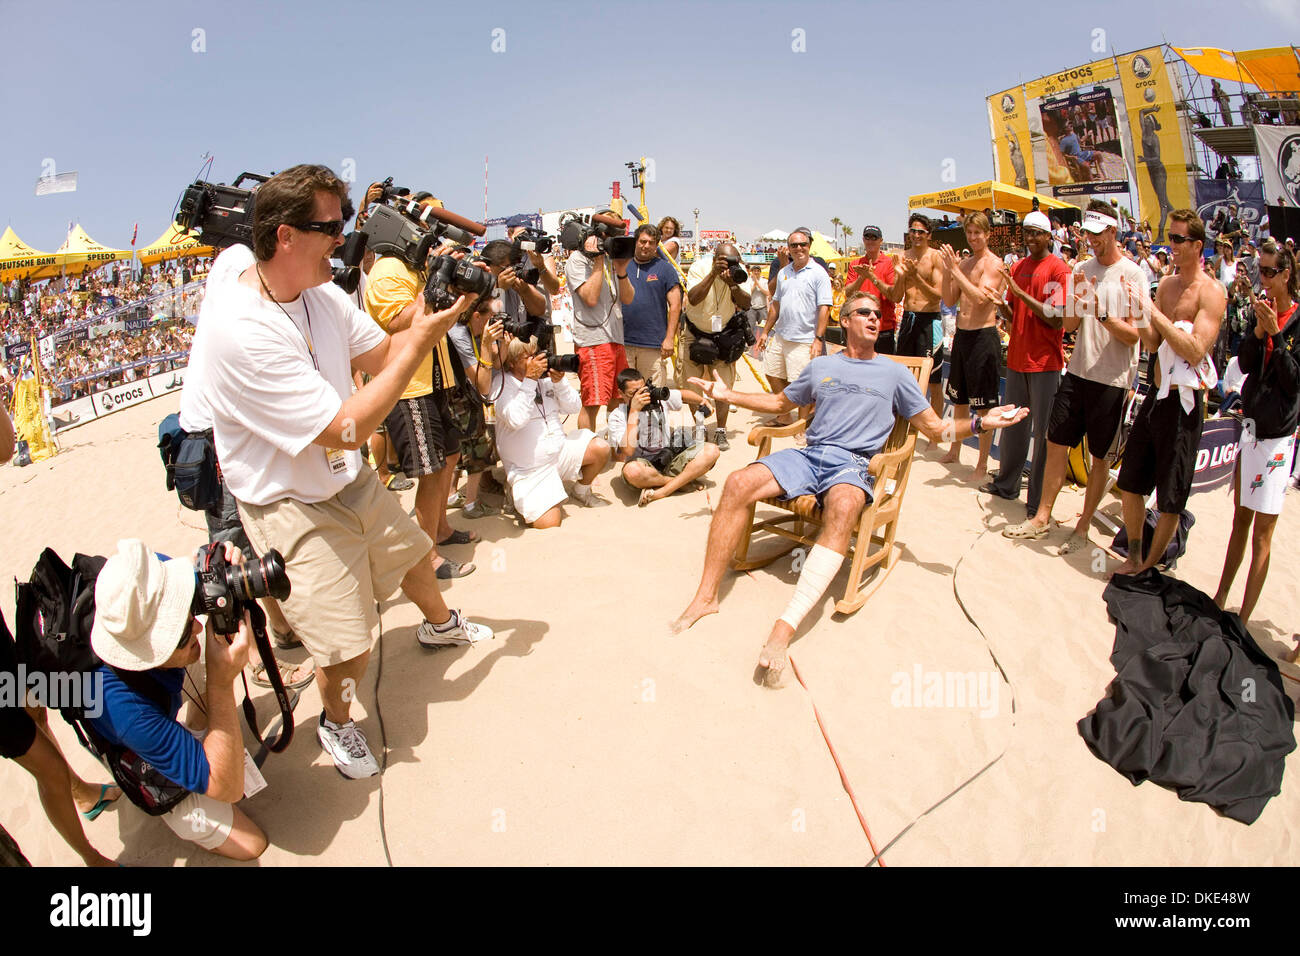 Aug 11, 2007 - Los Angeles, CA, USA - KARCH KIRALY, in all aspects one of the legends of the game of volleyball, officially retired from the game of professional beach volleyball at the Manhattan Beach Open beach volleyball tournament. The AVP (Association of Volleyball Professionals) gave Kiraly a deck chair as a gift to which he replied, '... I thought they were going to give me  Stock Photo